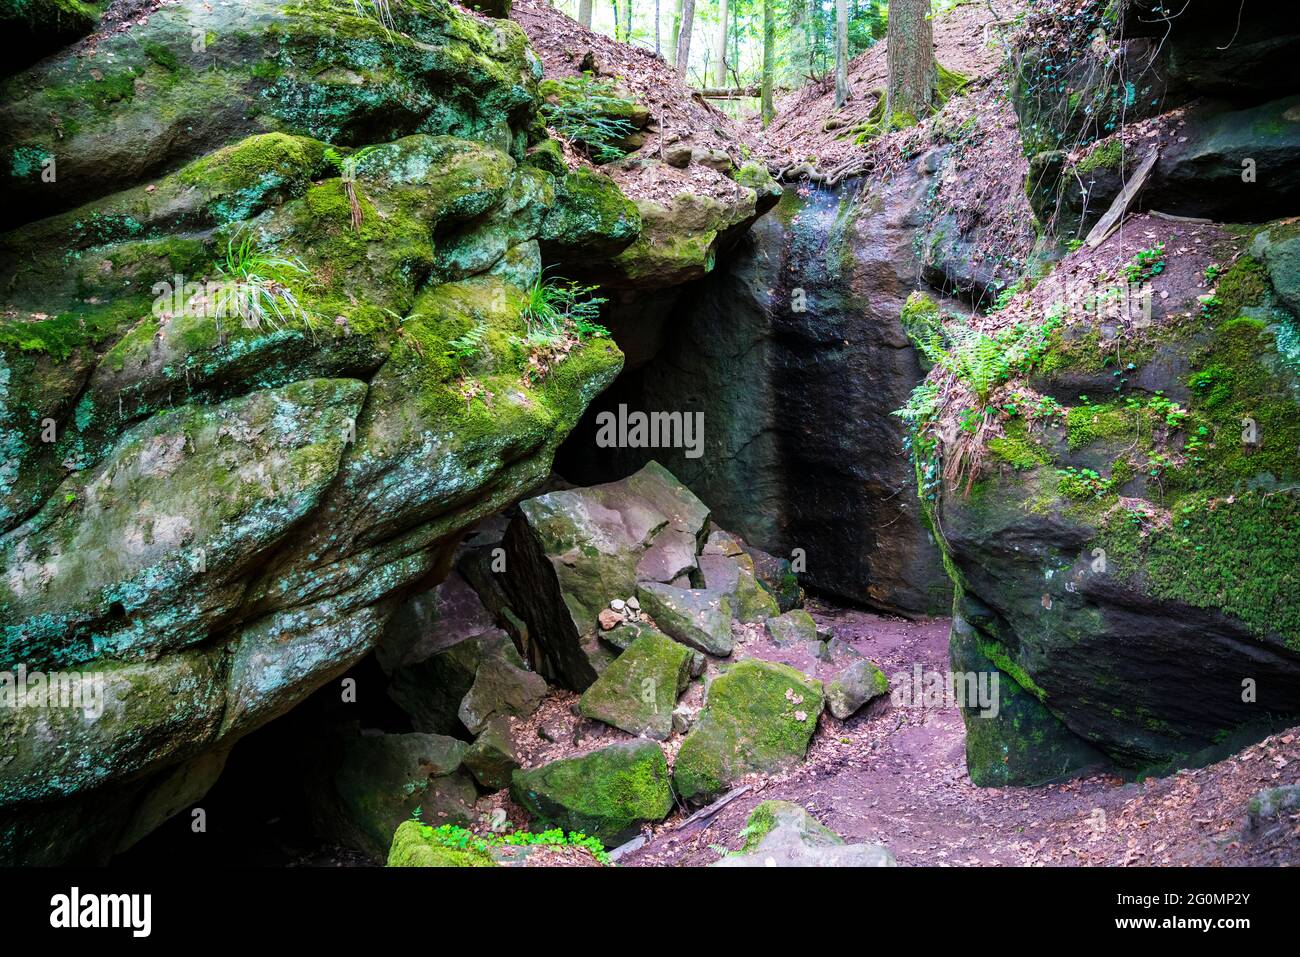 Germany, Gallengrotte caves covered with green moss and plants deep in the jungle like forest of welzheimer wald near ebnisee and kaisersbach Stock Photo